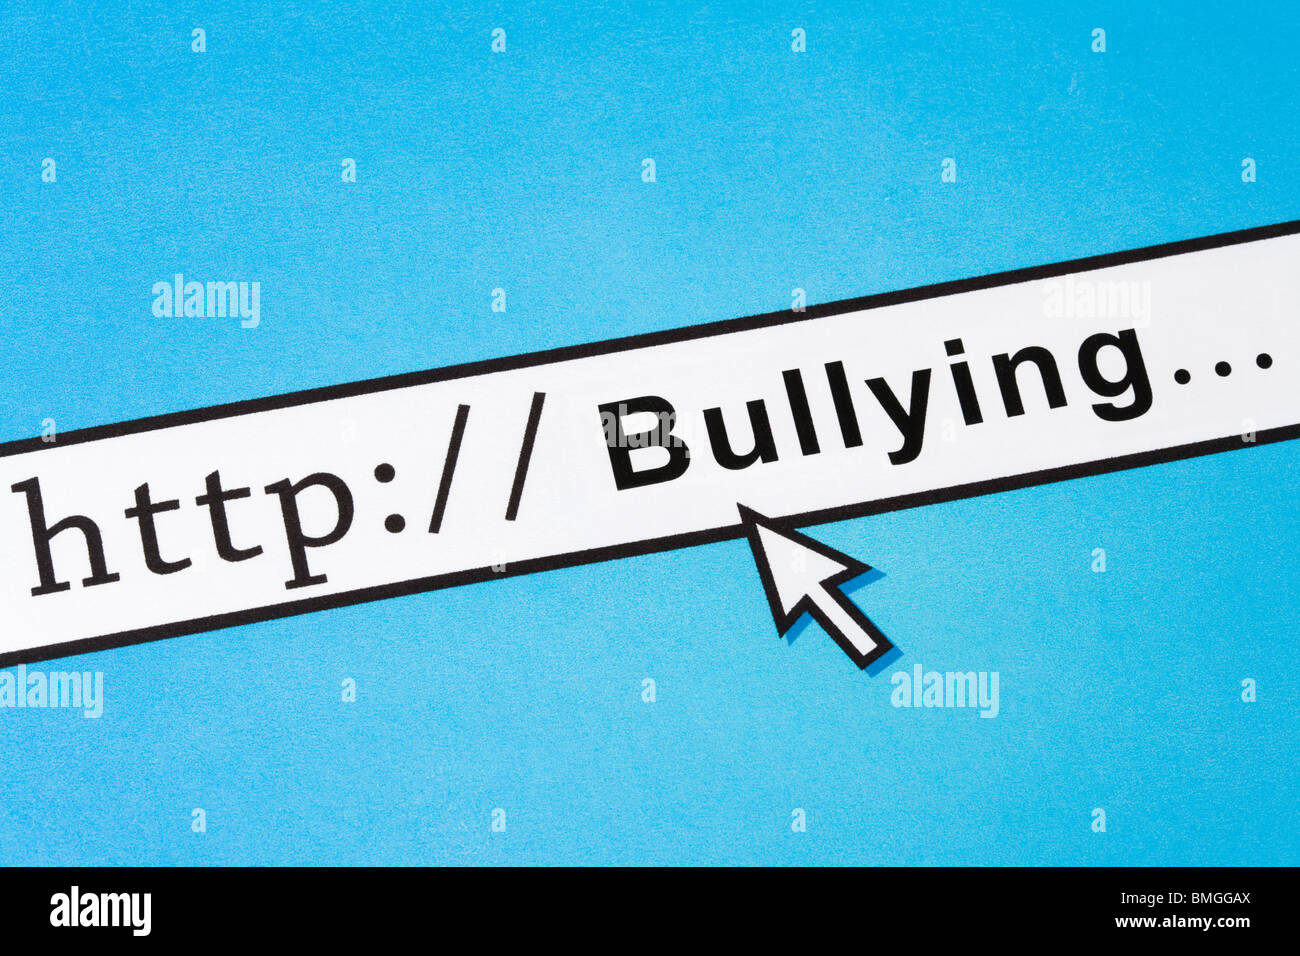 concept of Online Bullying, Social Issues Stock Photo